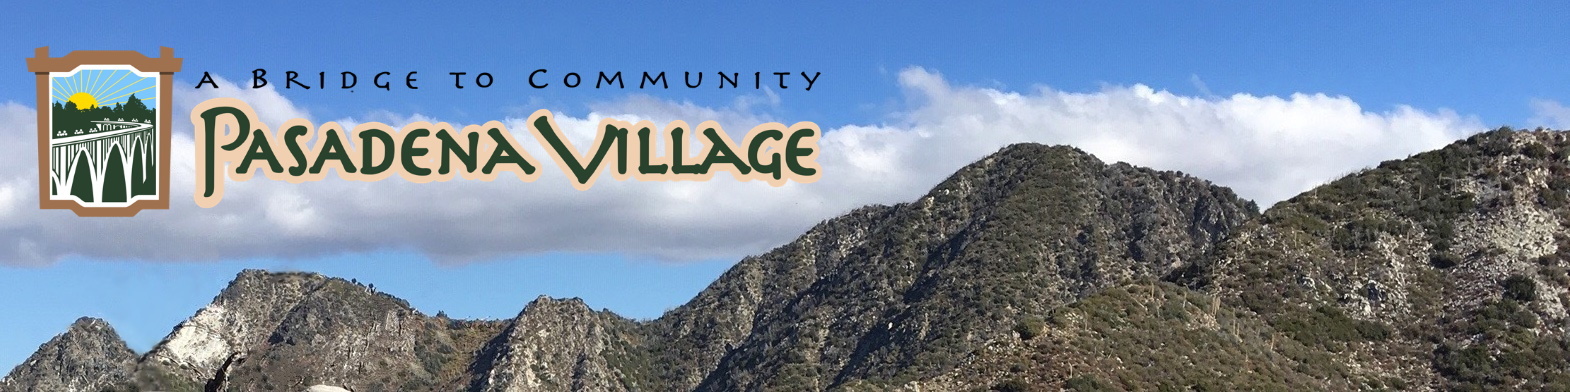 Header image for Pasadena Village showing nearby mountains and the logo of the Pasadena Village